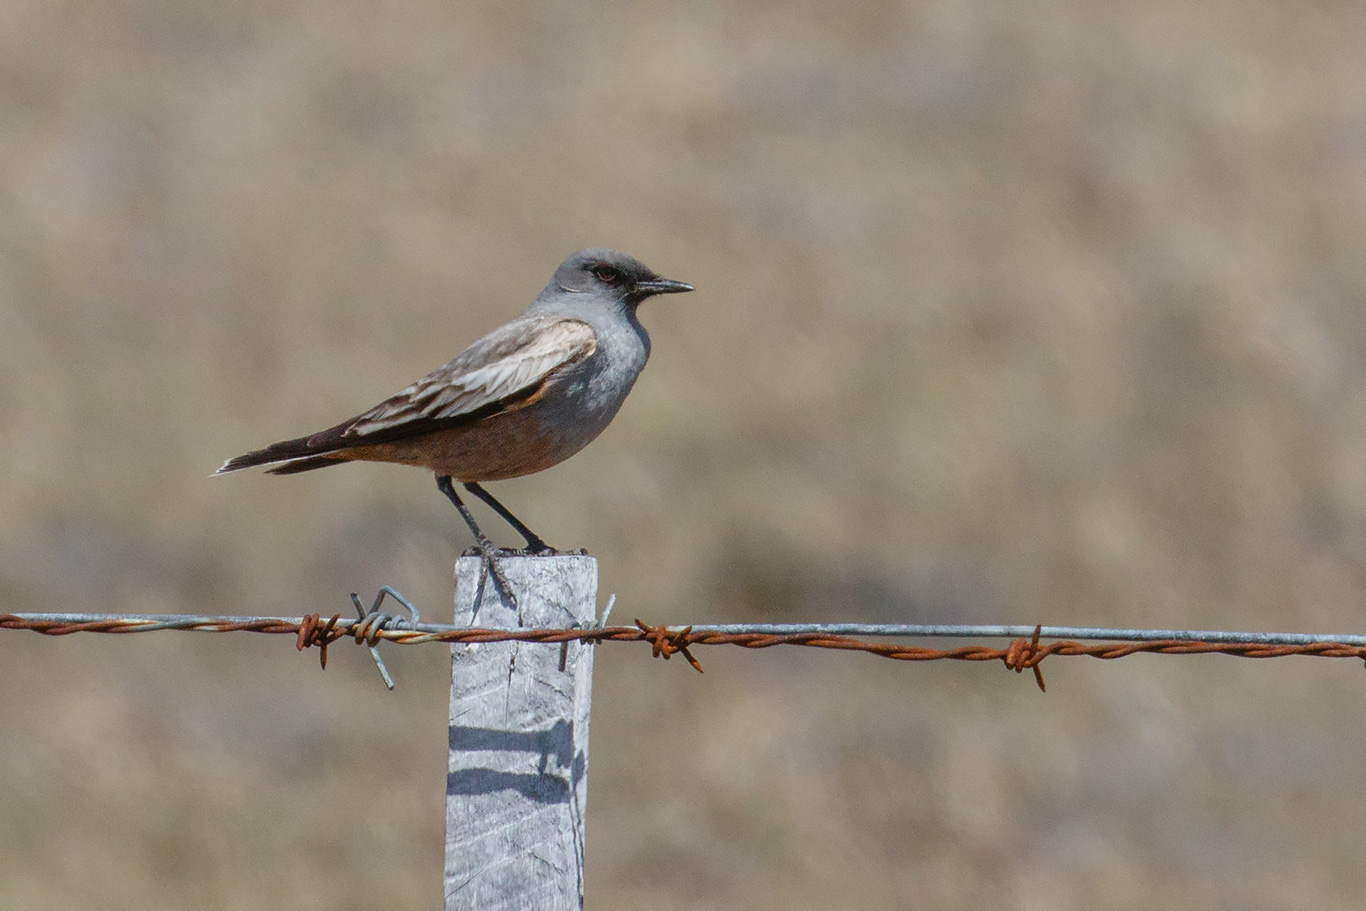 Chocolate-vented Tyrant, Y-455 track, Patagonian Steppe, Punta Arenas, Chile.